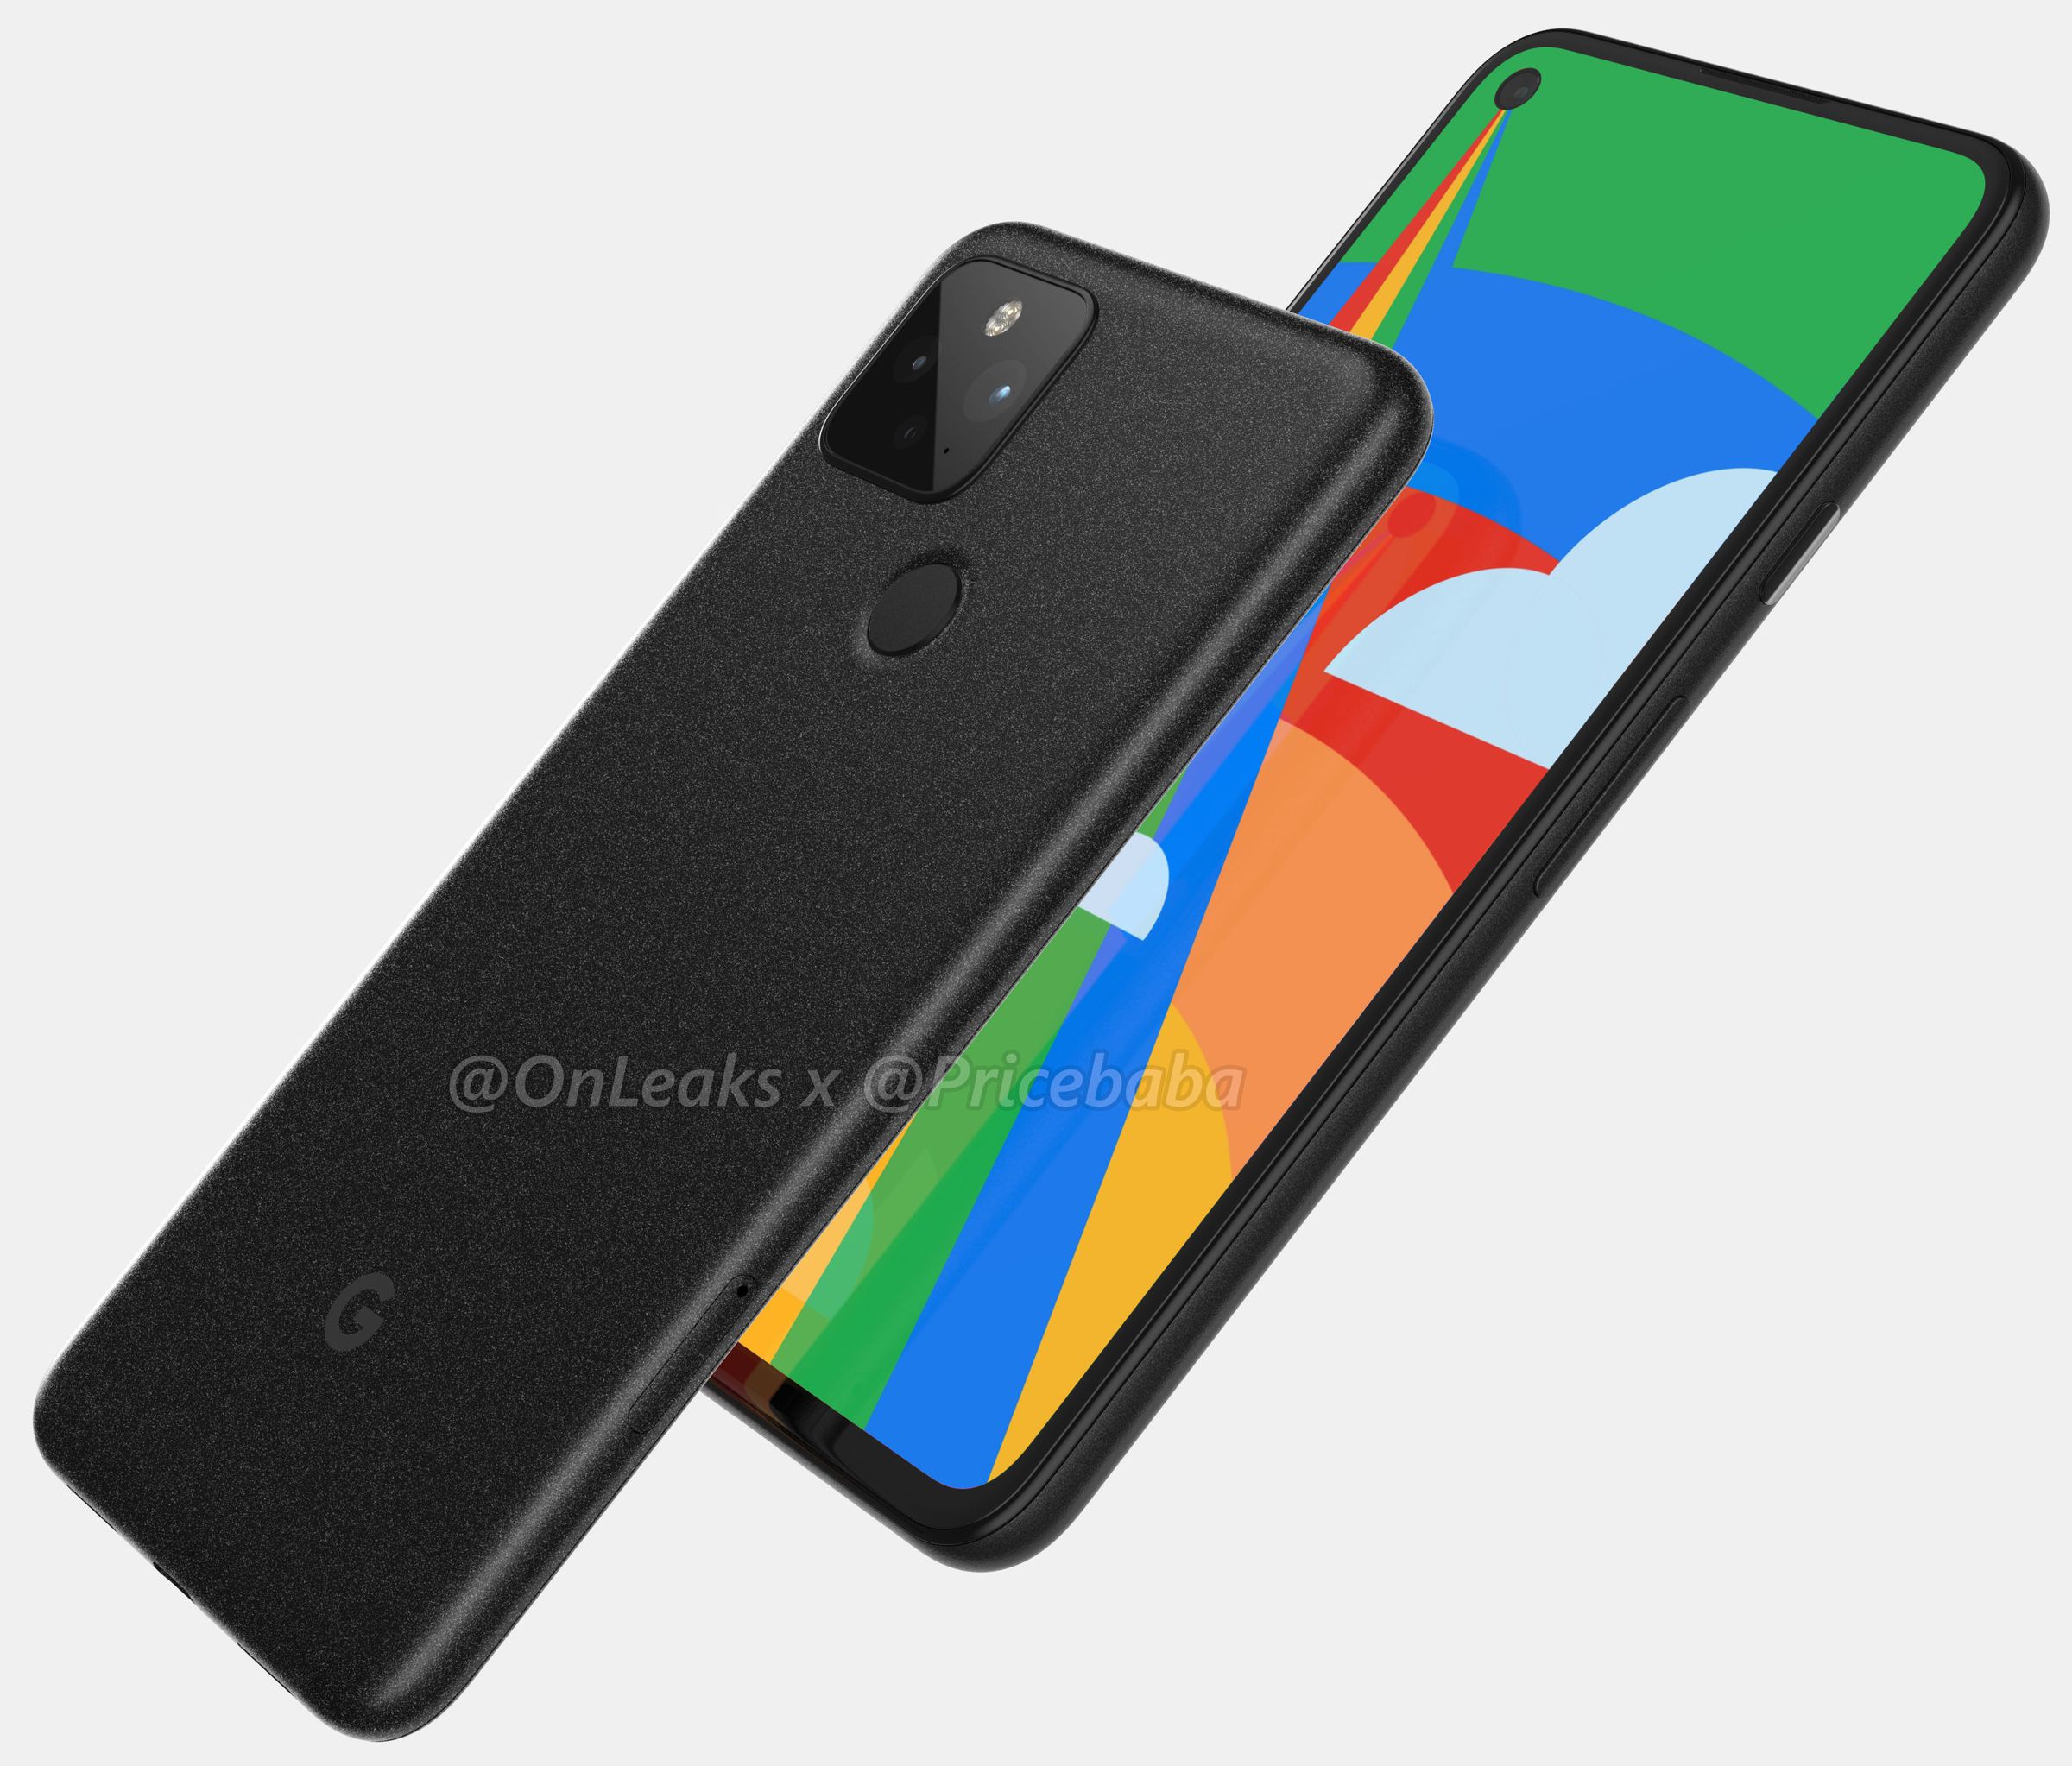 A previously leaked render of the (likely) Pixel 5